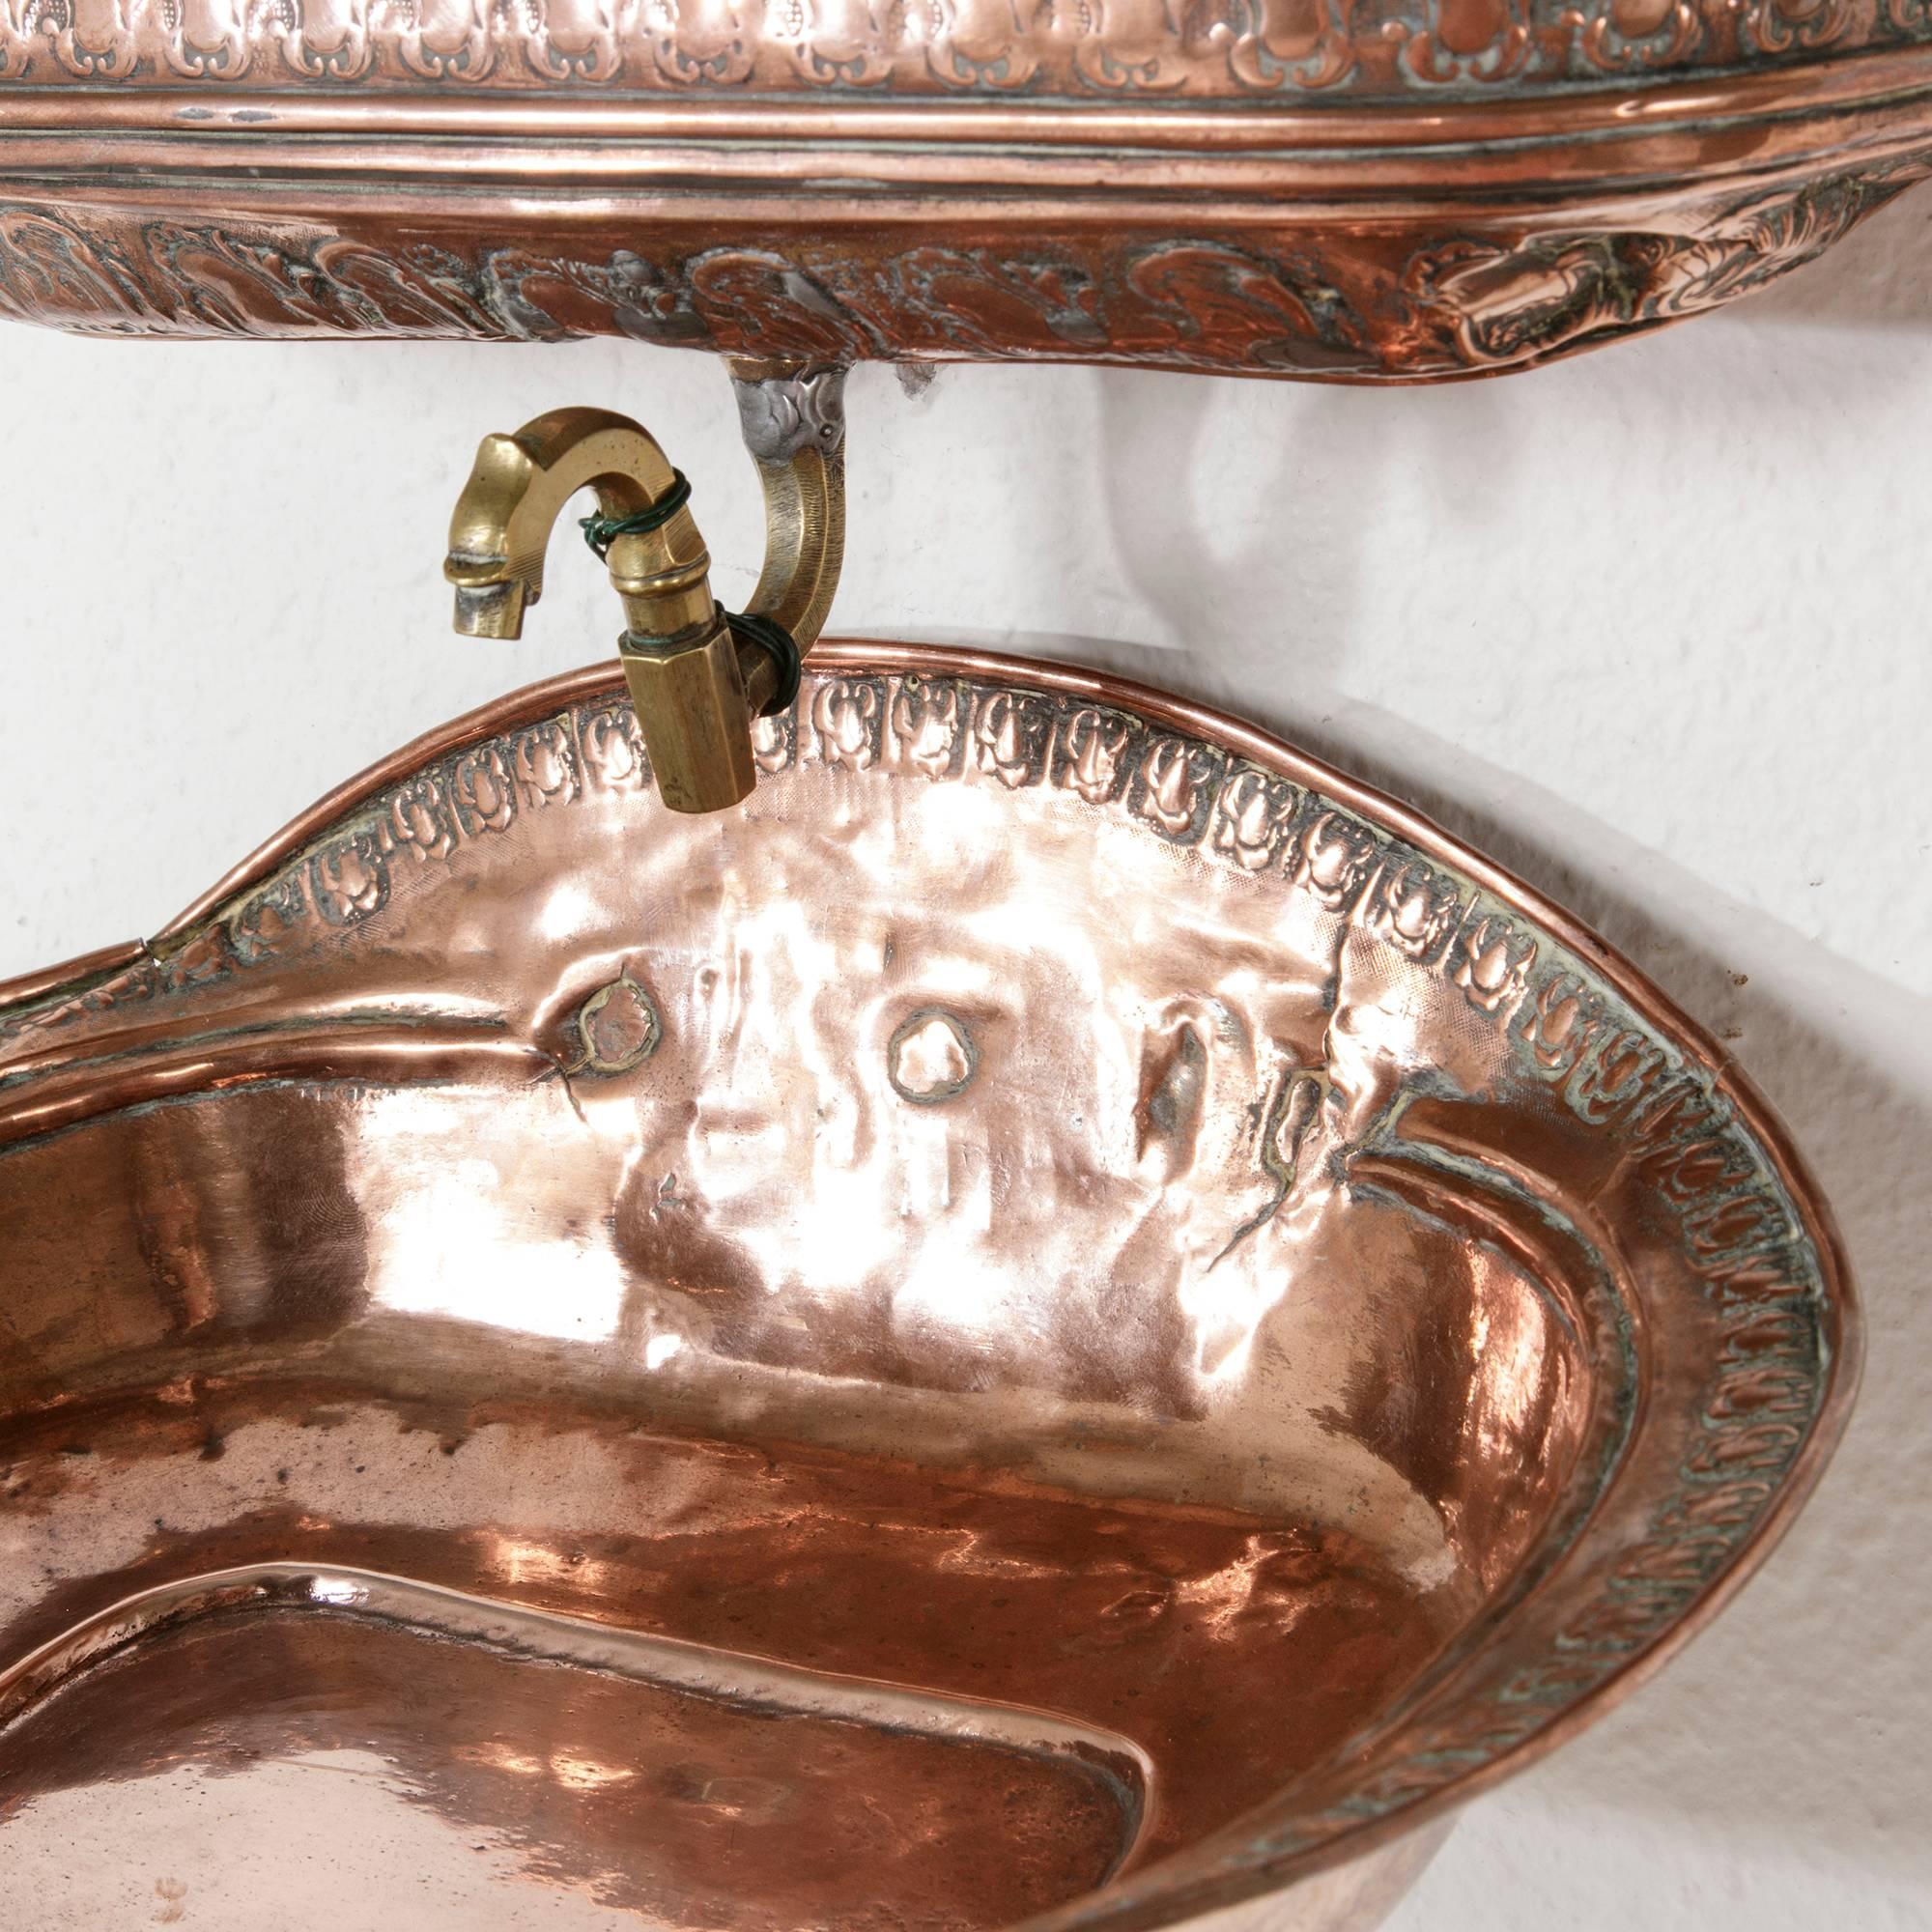 Repoussé 18th Century French Copper Repousse Wall Fountain Lavabo with Bronze Spigot